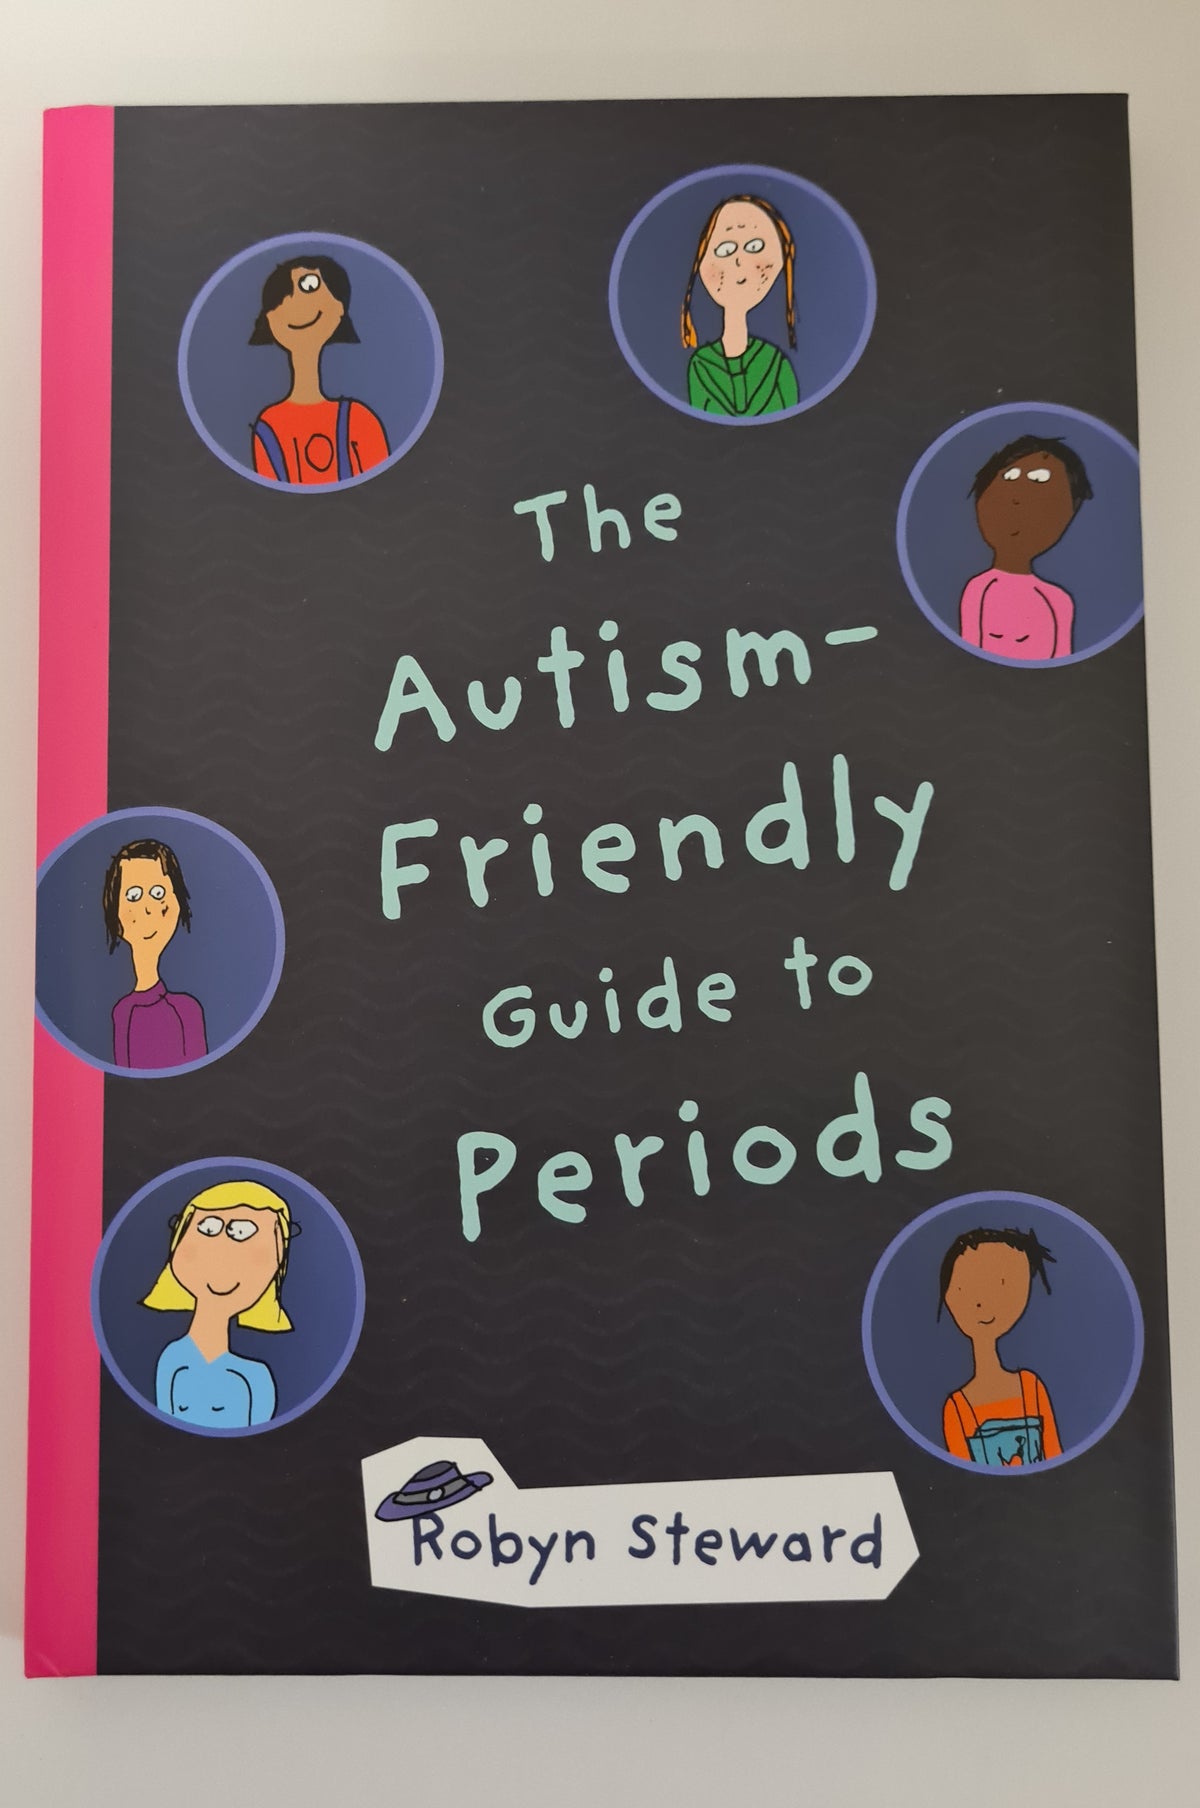 The Autism Friendly Guide to Periods